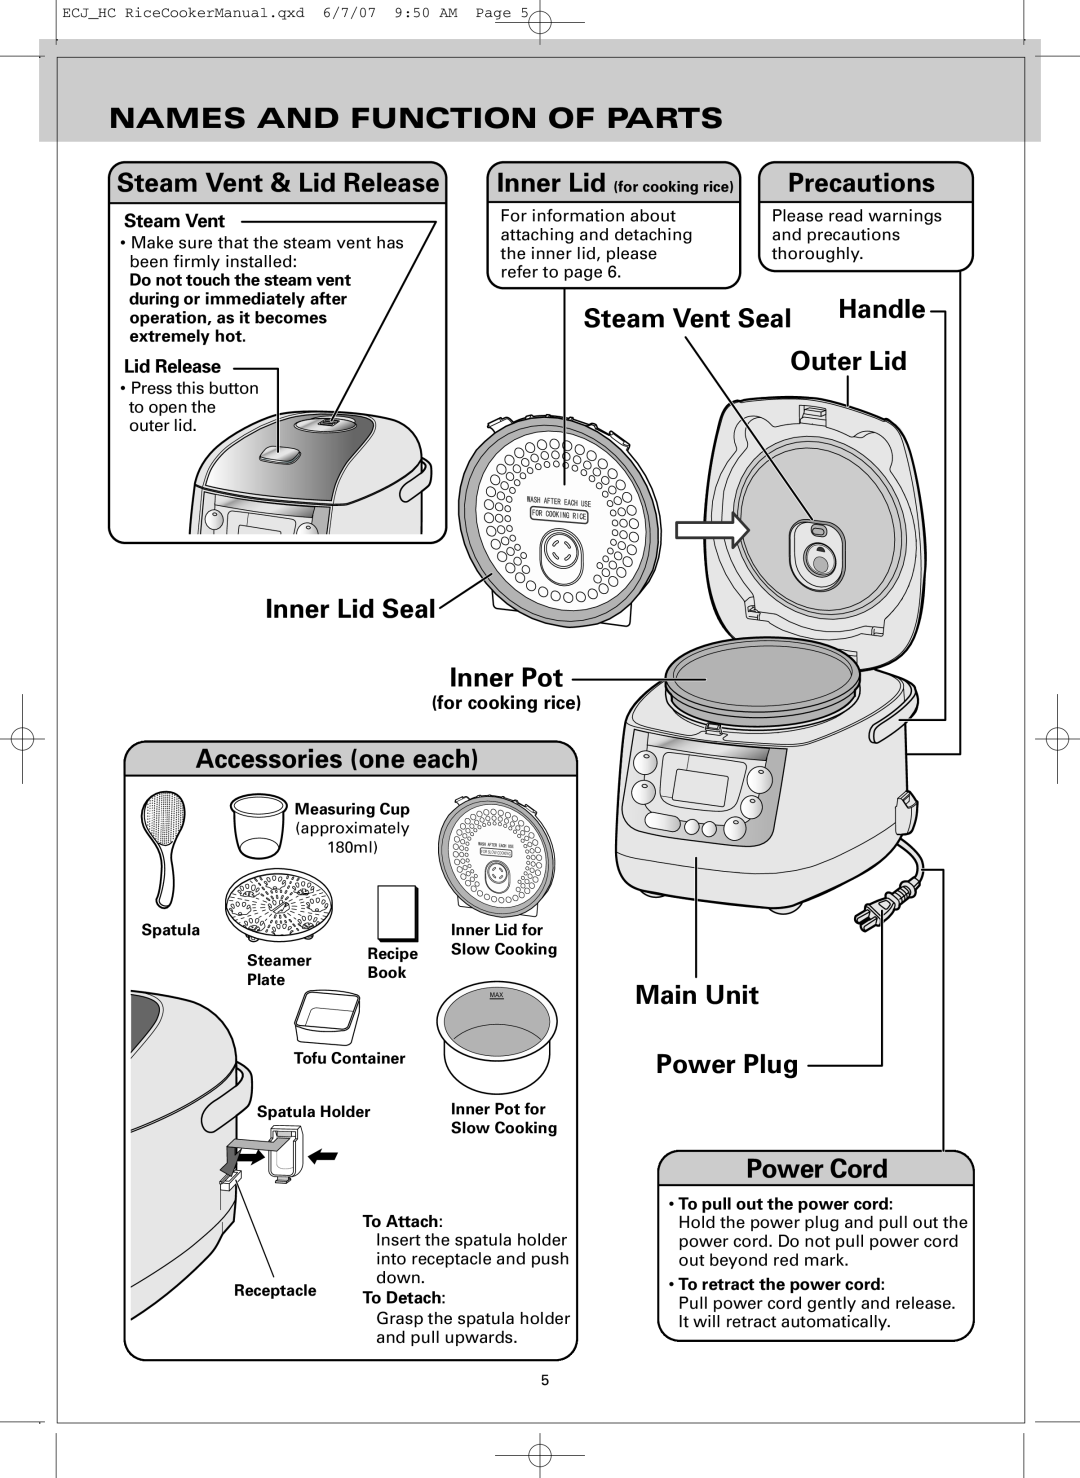 Sanyo ECJ-HC100H Names And Function Of Parts, Steam Vent & Lid Release, Precautions, Steam Vent Seal, Handle, Outer Lid 